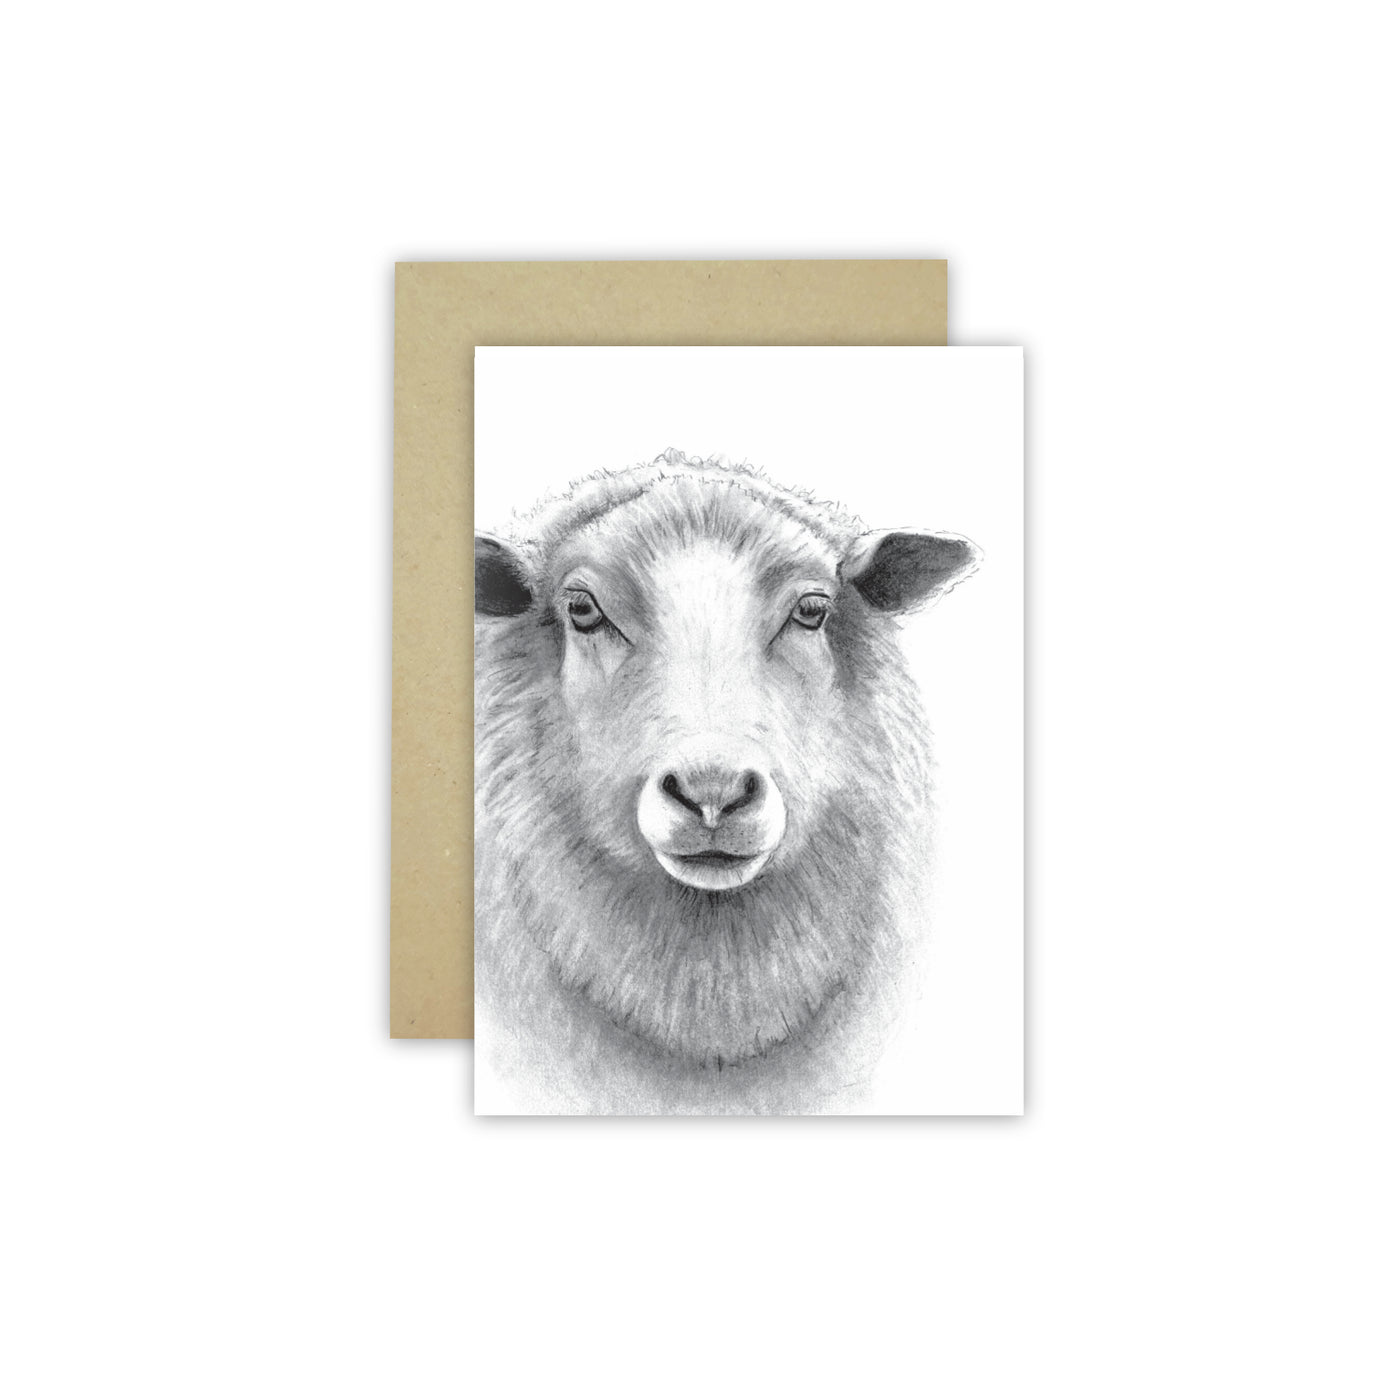 Sheep C6 Card - Wholesale - NEW SIZE